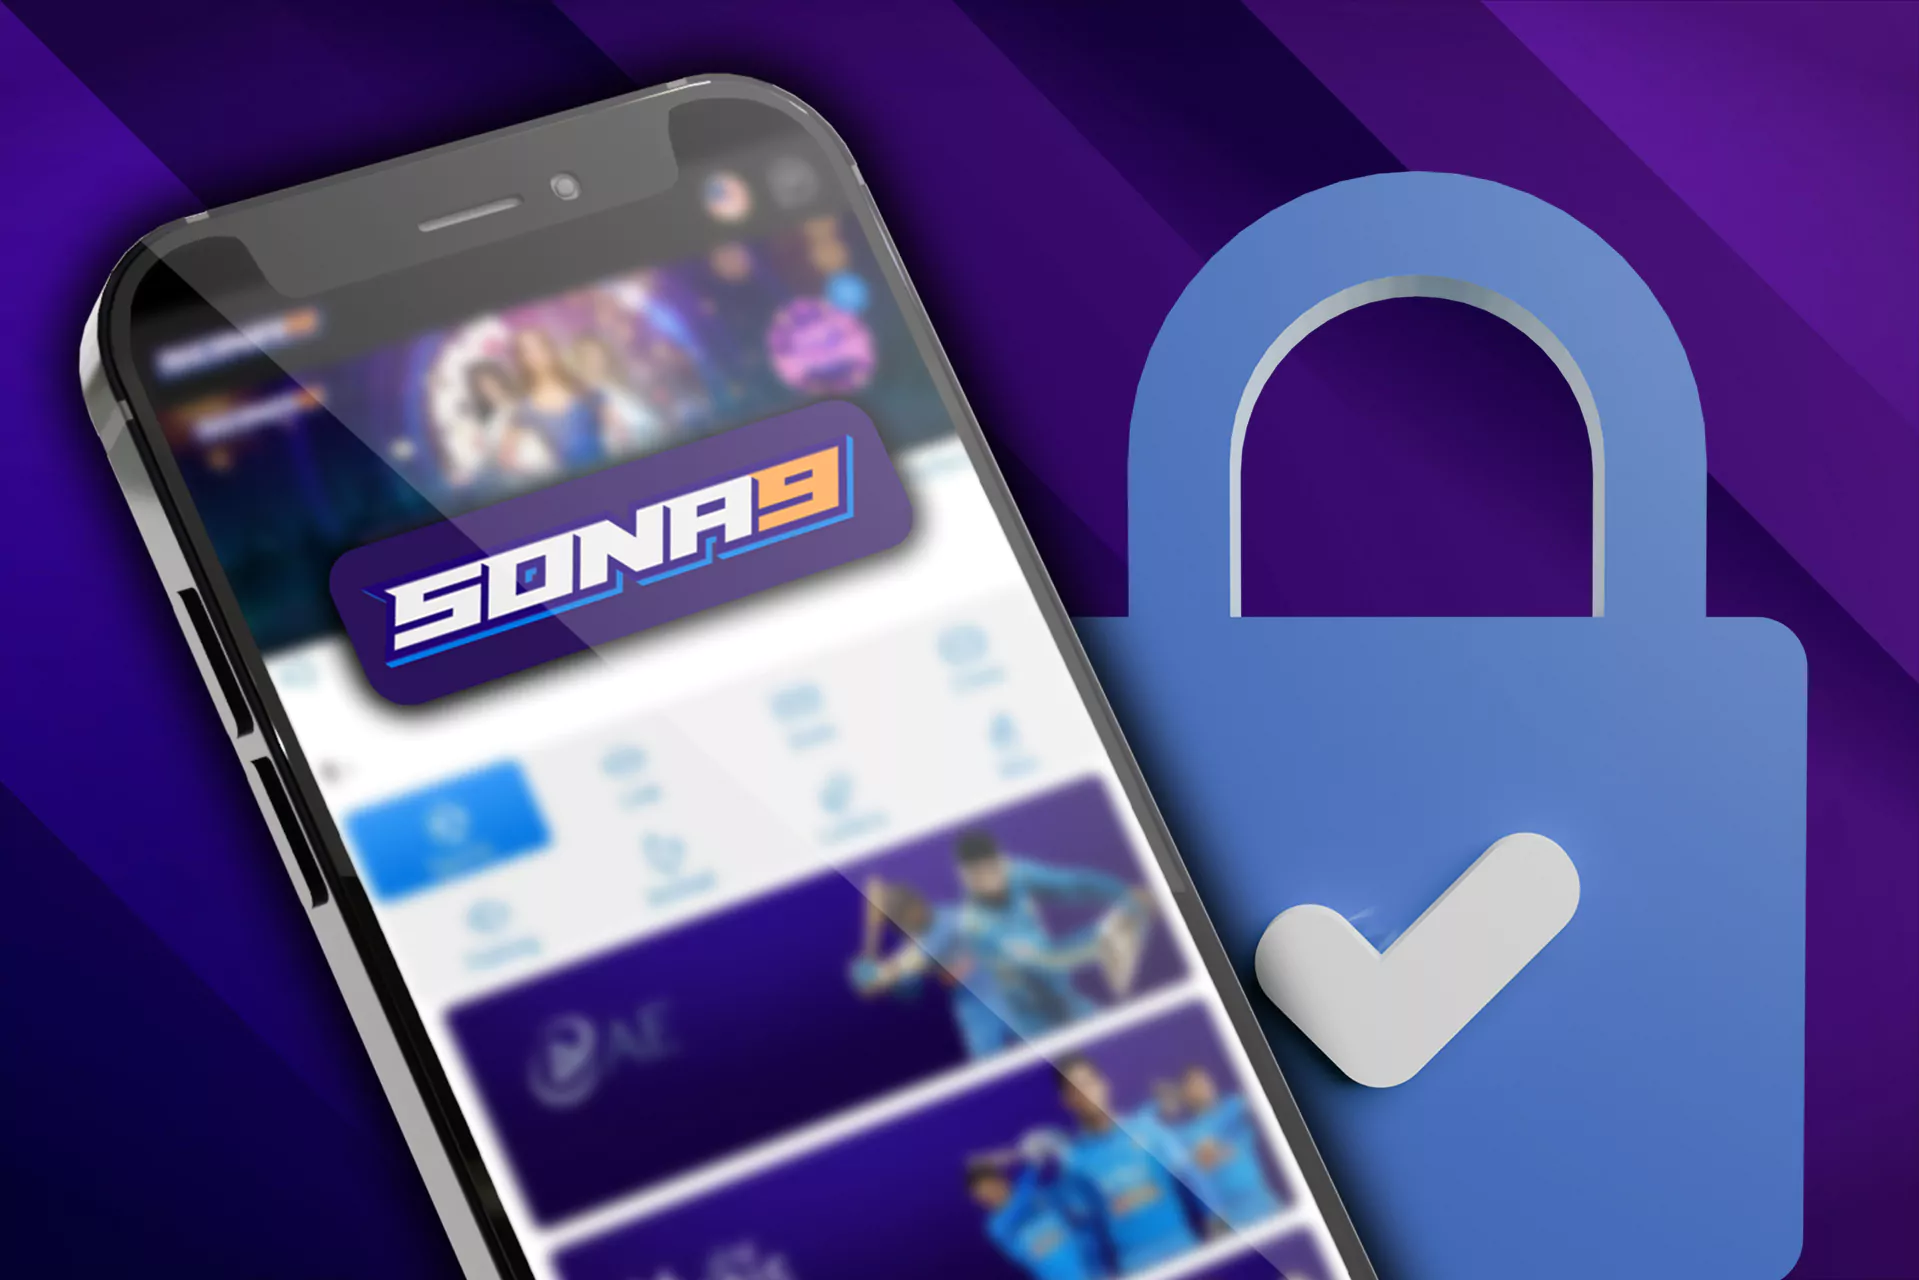 Sona9 mobile app is safe and secure.